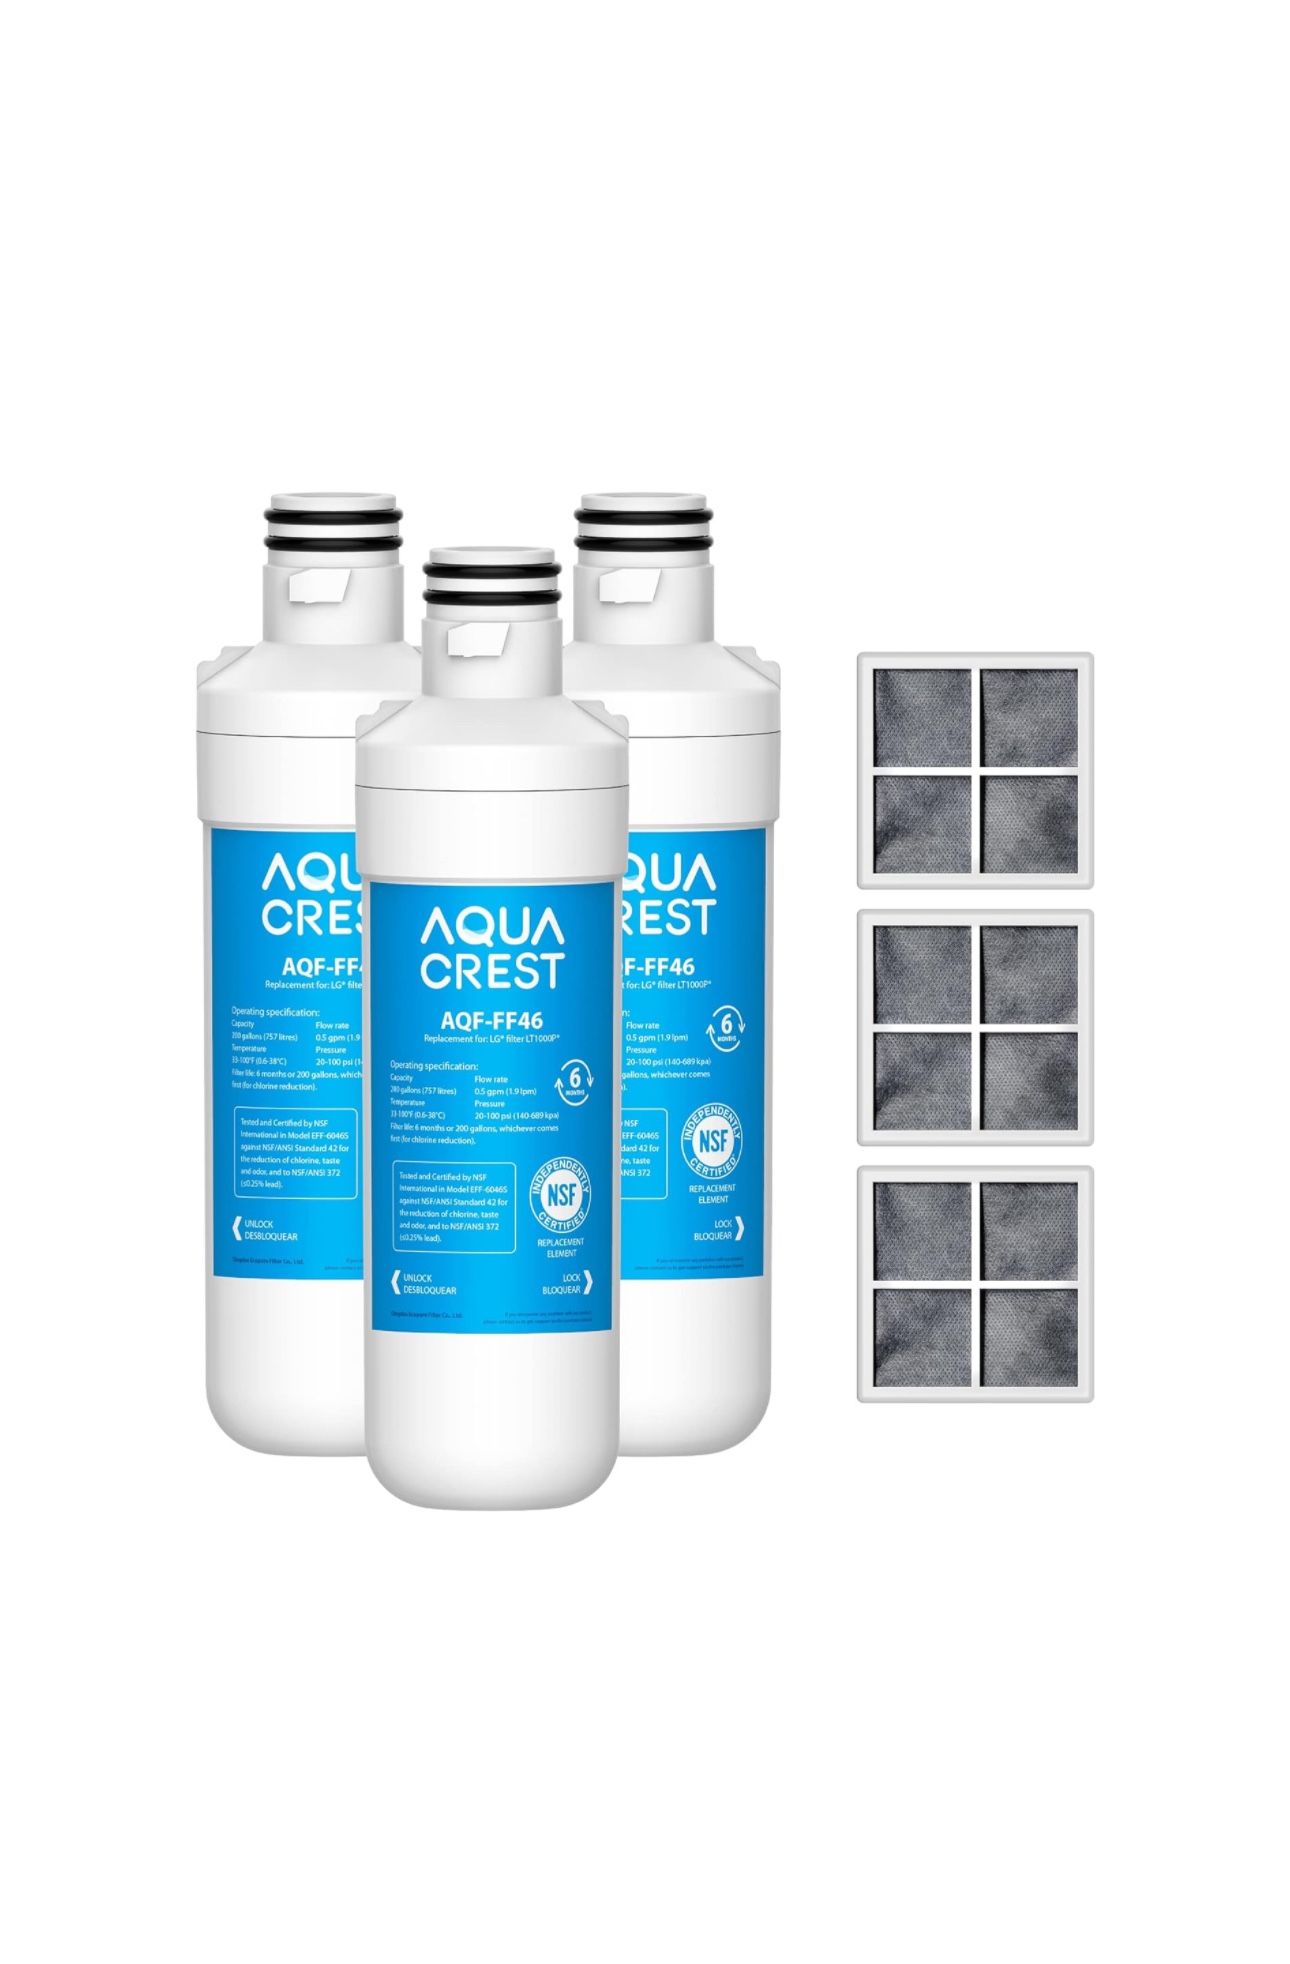 New Sealed In The Box We Have Big quantity AQUA CREST LT1000PC ADQ747935 Refrigerator Water Filter and Air Filter, Replacement for LG® LT1000P®/PC/PCS